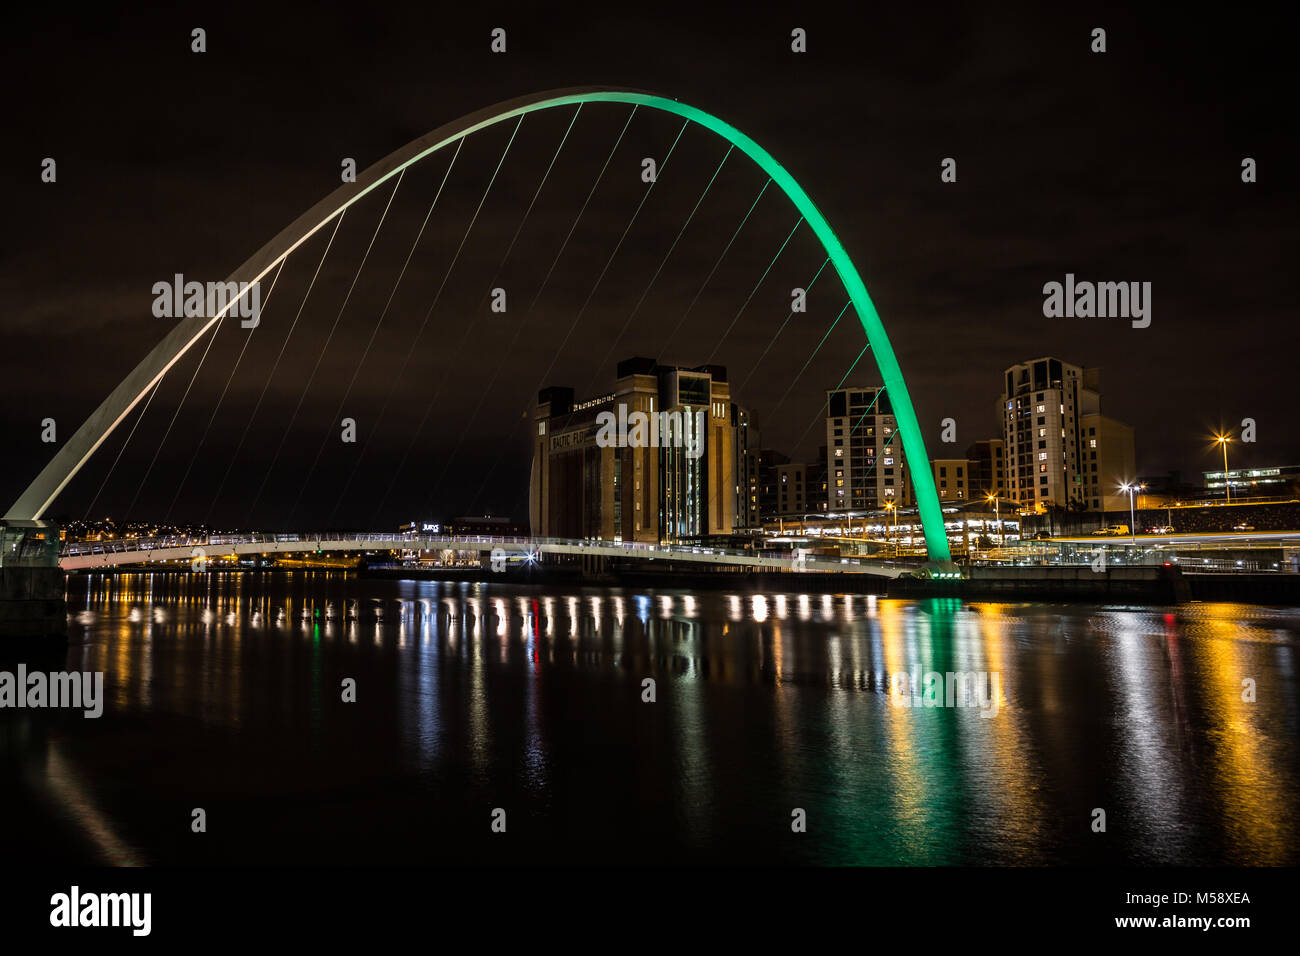 Newcastle upon Tyne, Quayside di notte. Foto Stock